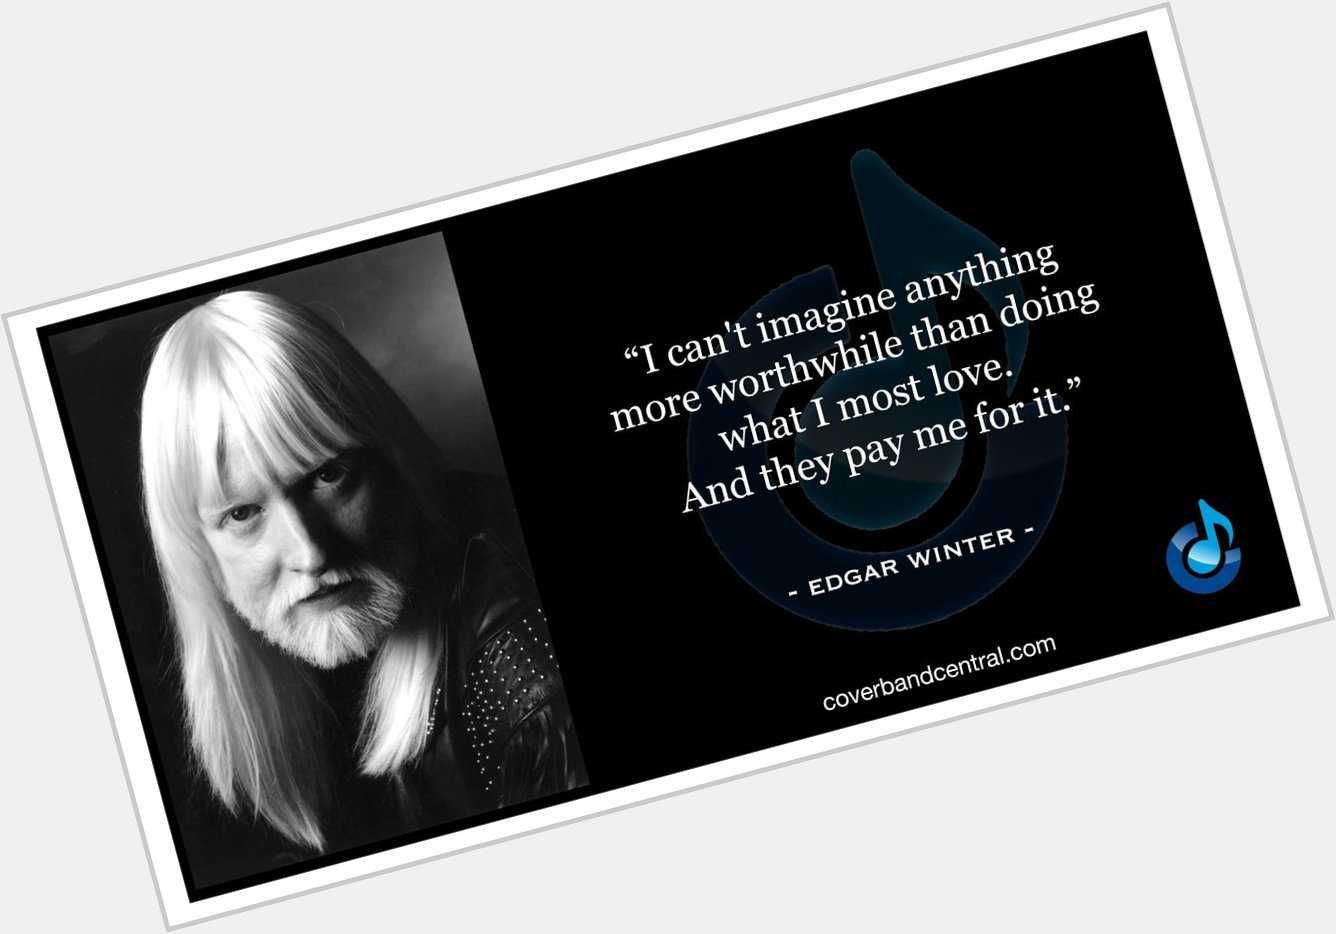 Happy 74th Birthday to the great Edgar Winter, who was born in Beaumont, Texas on this day in 1946. 